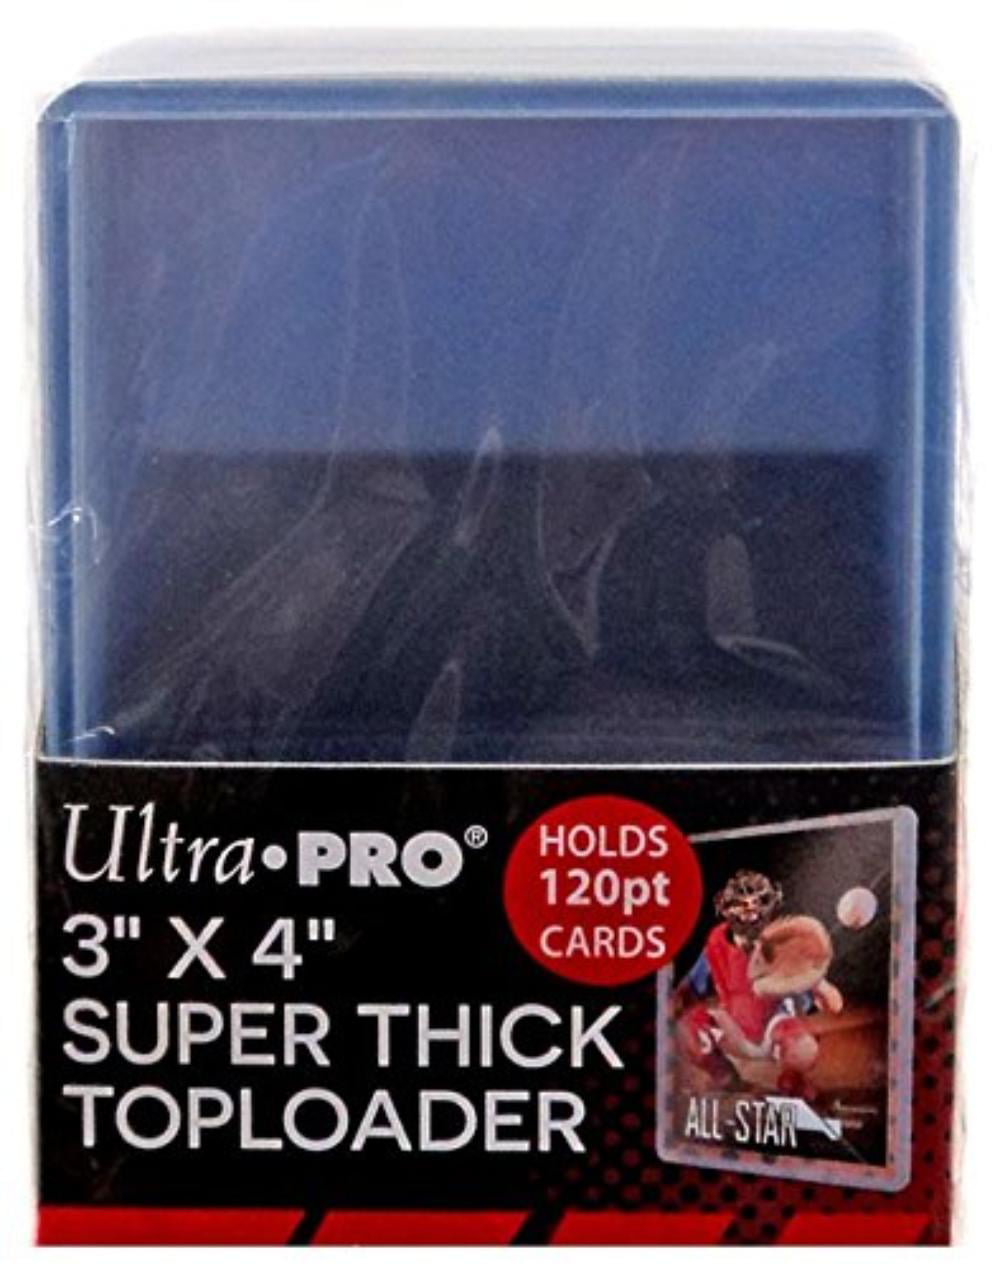 THICK 3 NEW ULTRA PRO 3"X4" CARD TOPLOADER PACK SIZES REGULAR SUPER THICK 